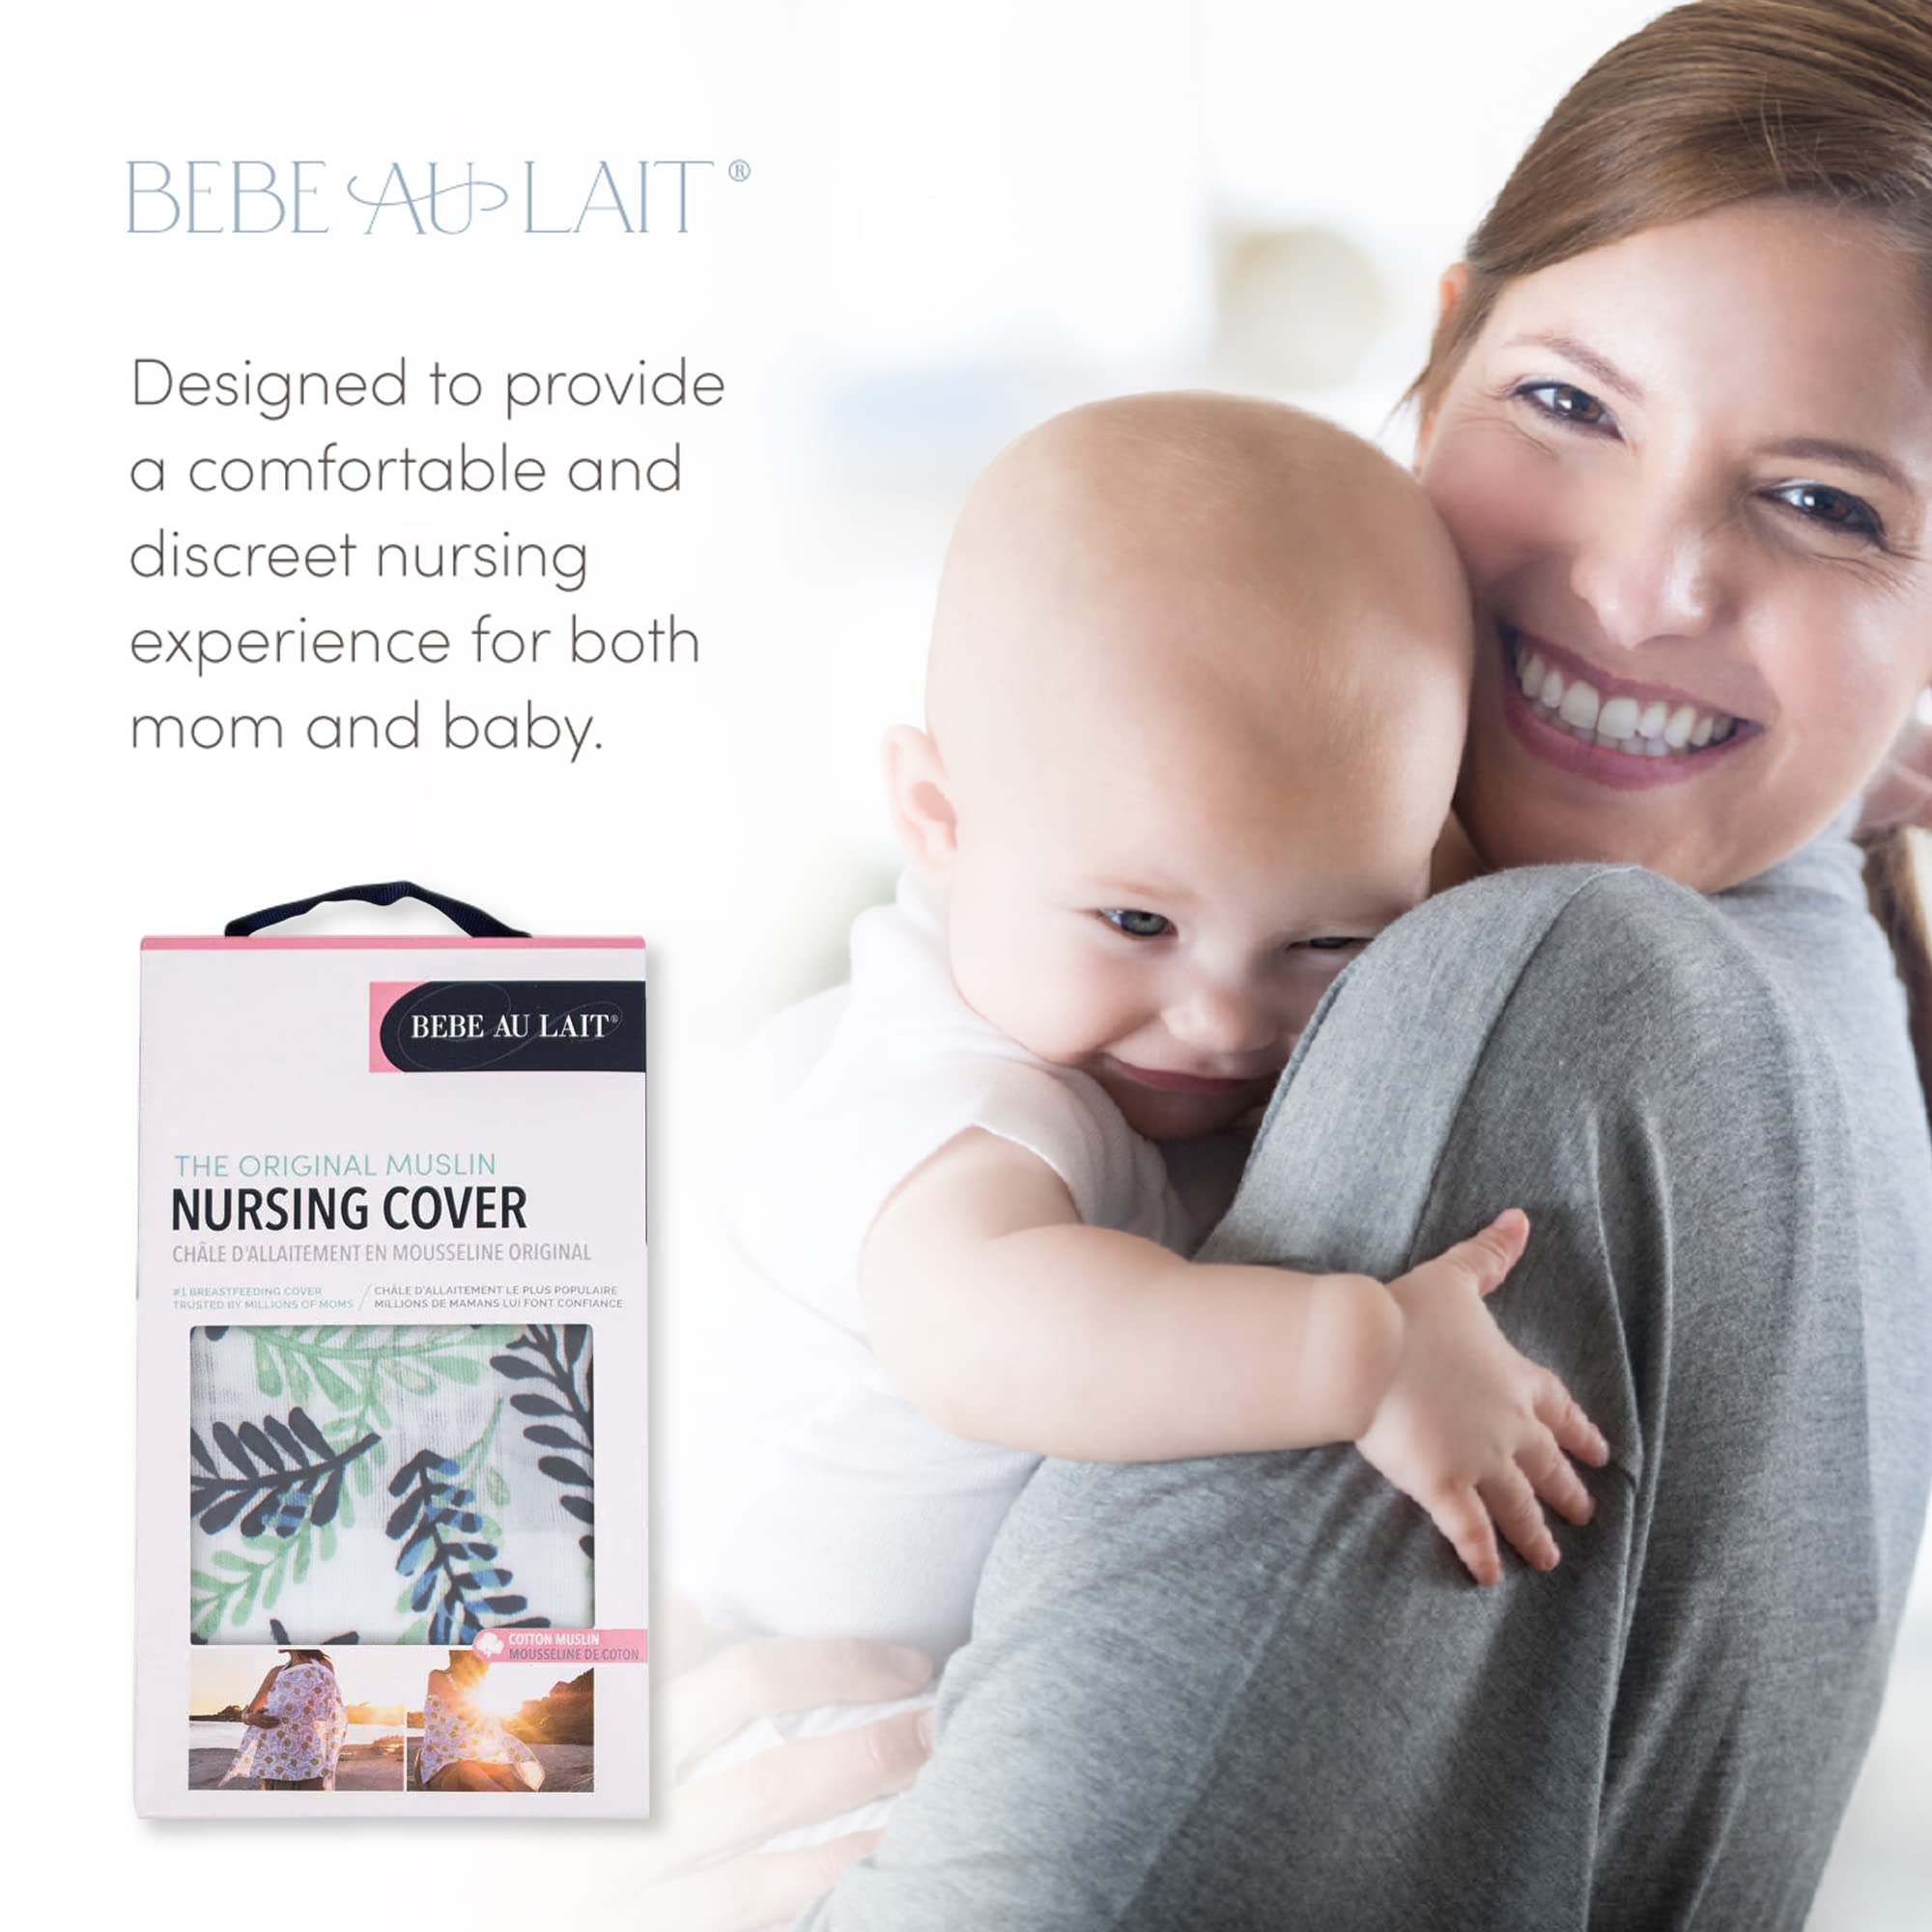 Bebe au Lait Nursing Cover, Apron, Shawl, Privacy Covers for Breast Feeding & Pumping, Breastfeeding Cover for Mom, Soft, & Breathable Muslin Cotton, Full Coverage, One Size Fits All - Athens